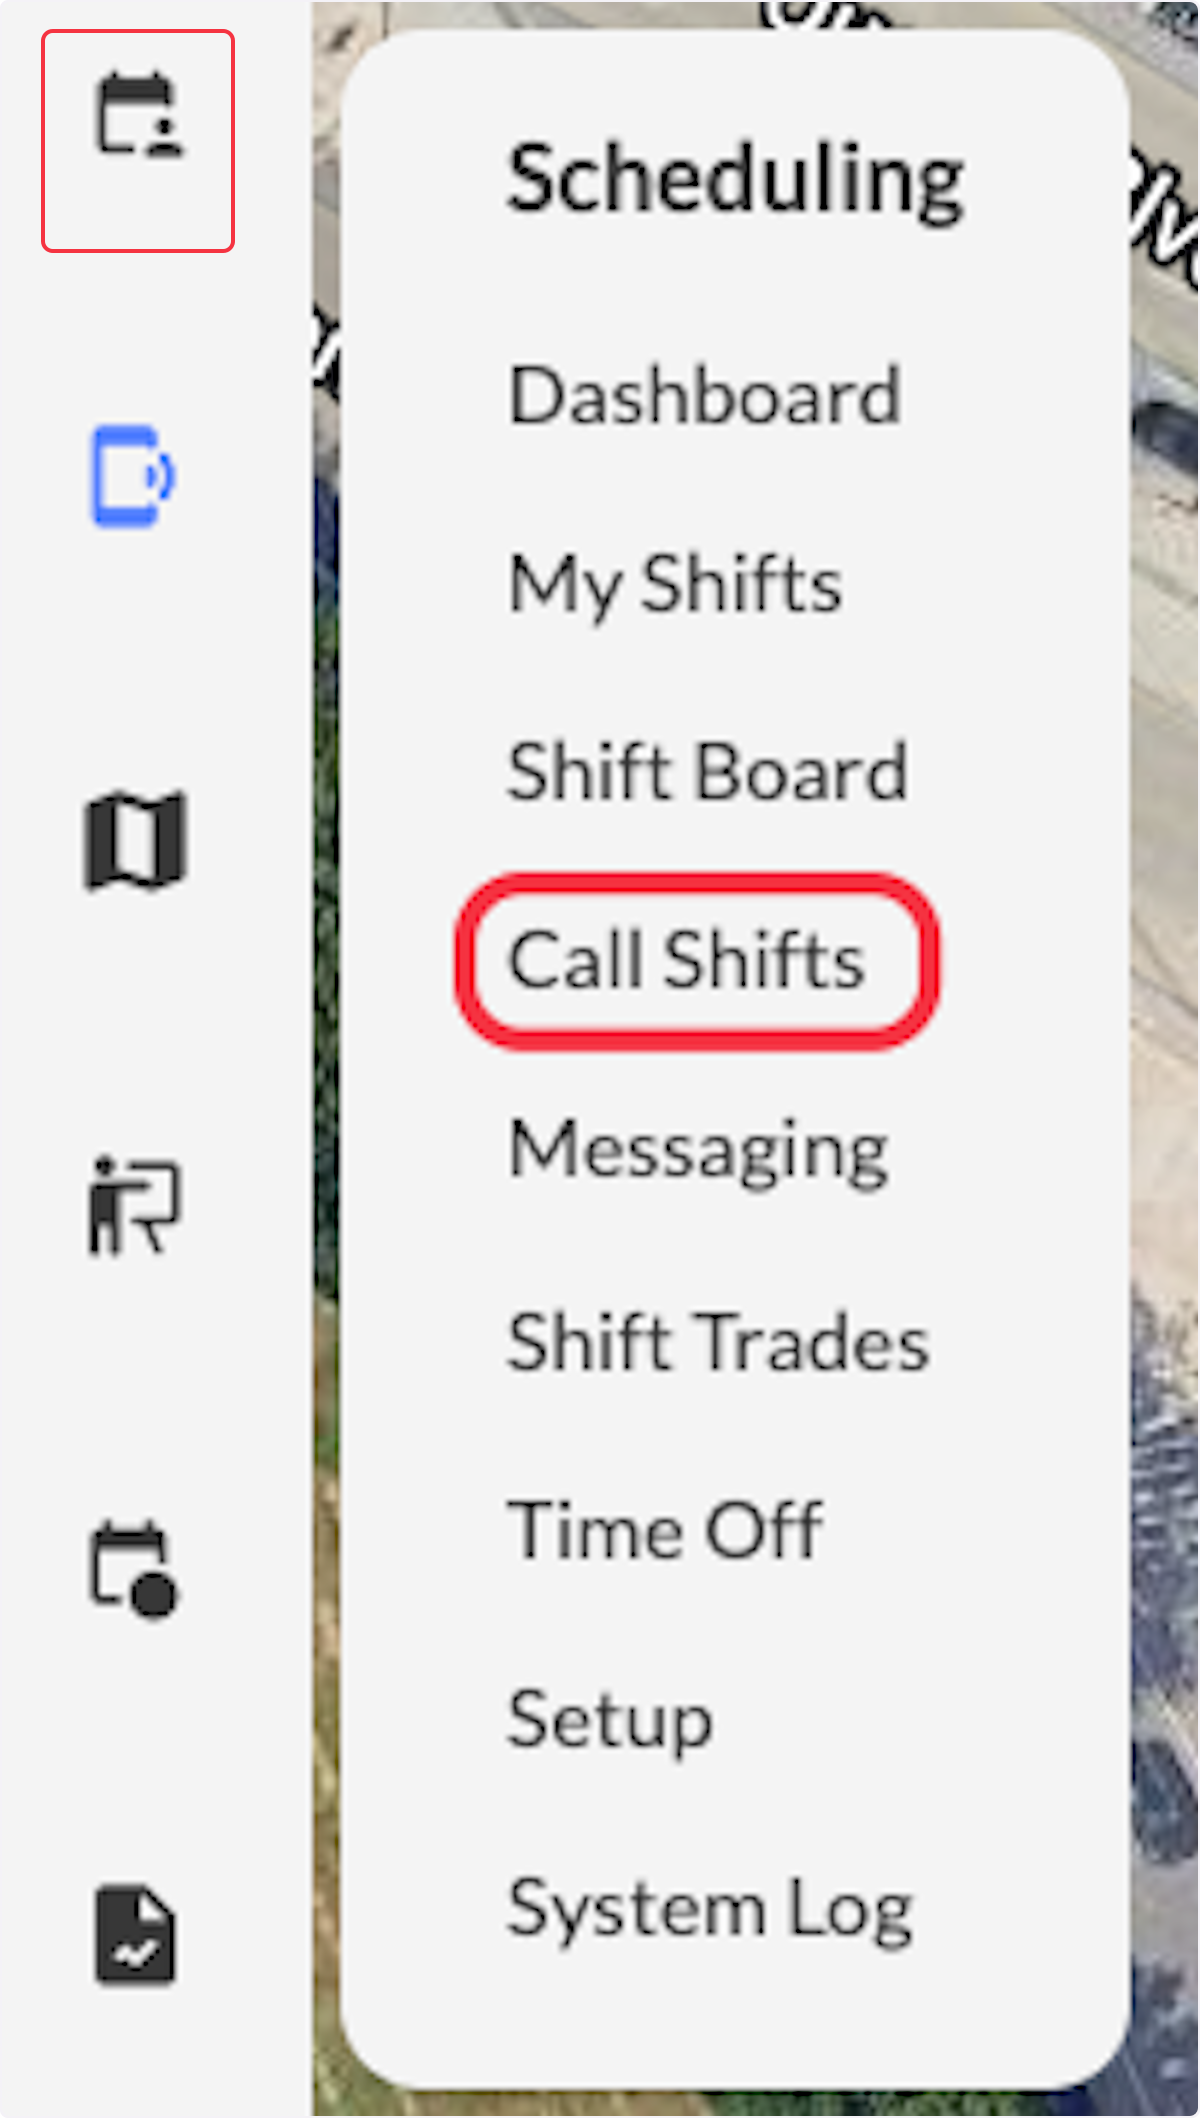 Click on Call Shifts